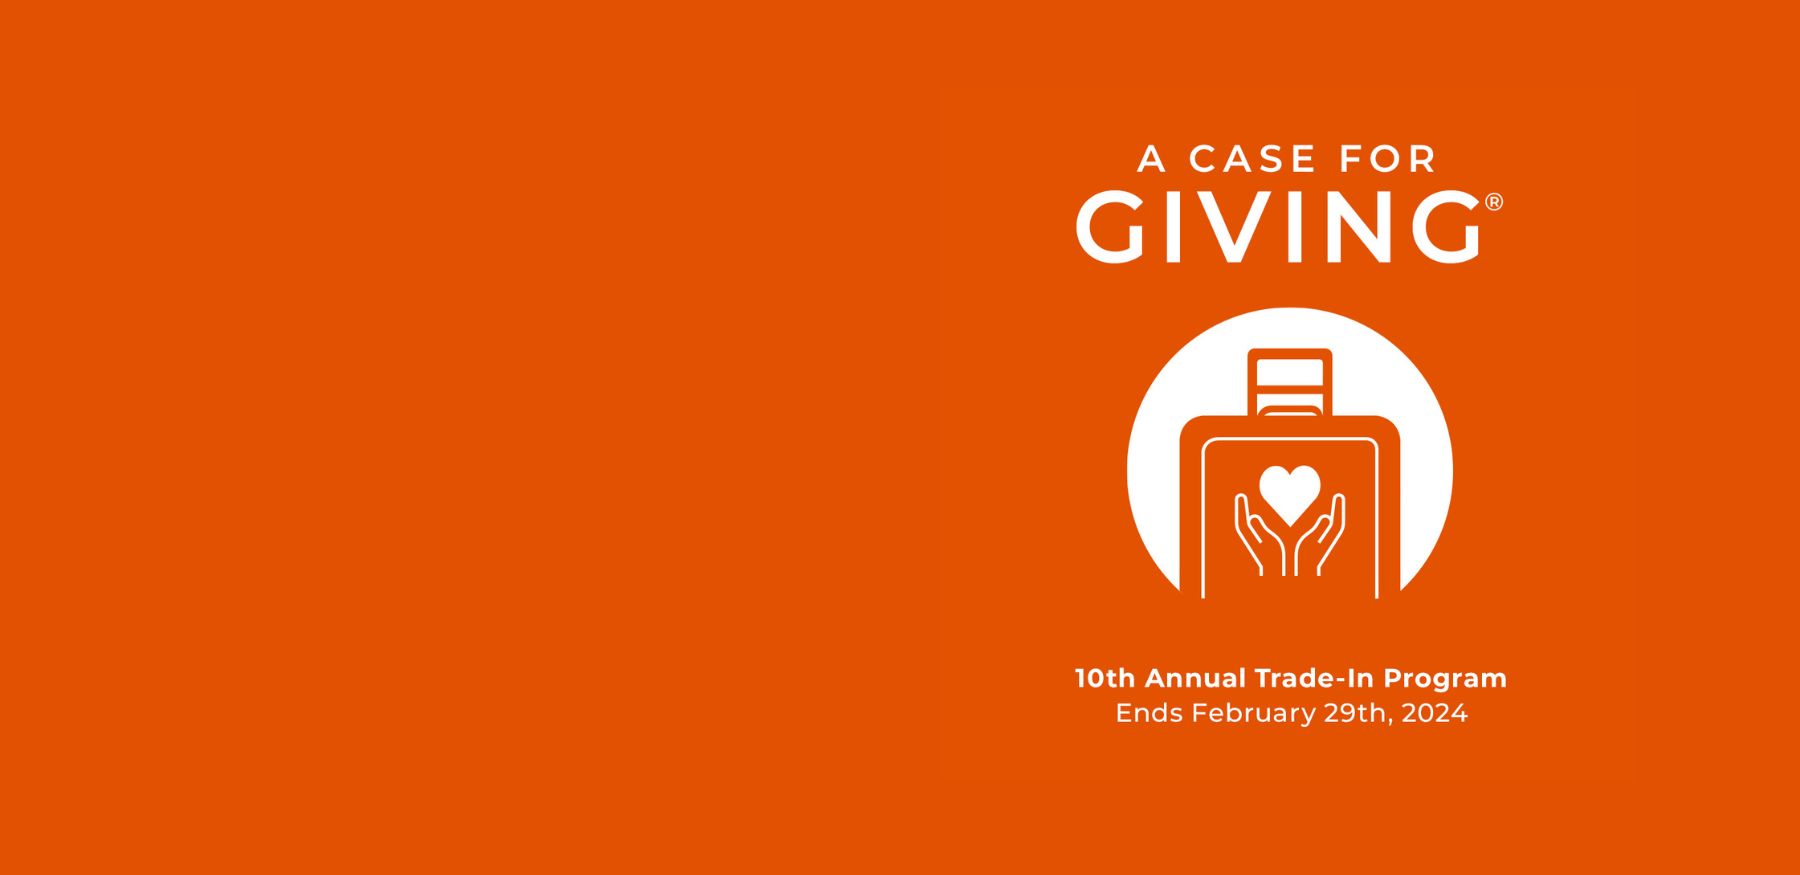 A Case for Giving | 10th Annual Trade-In Program | Ends February 29, 2024